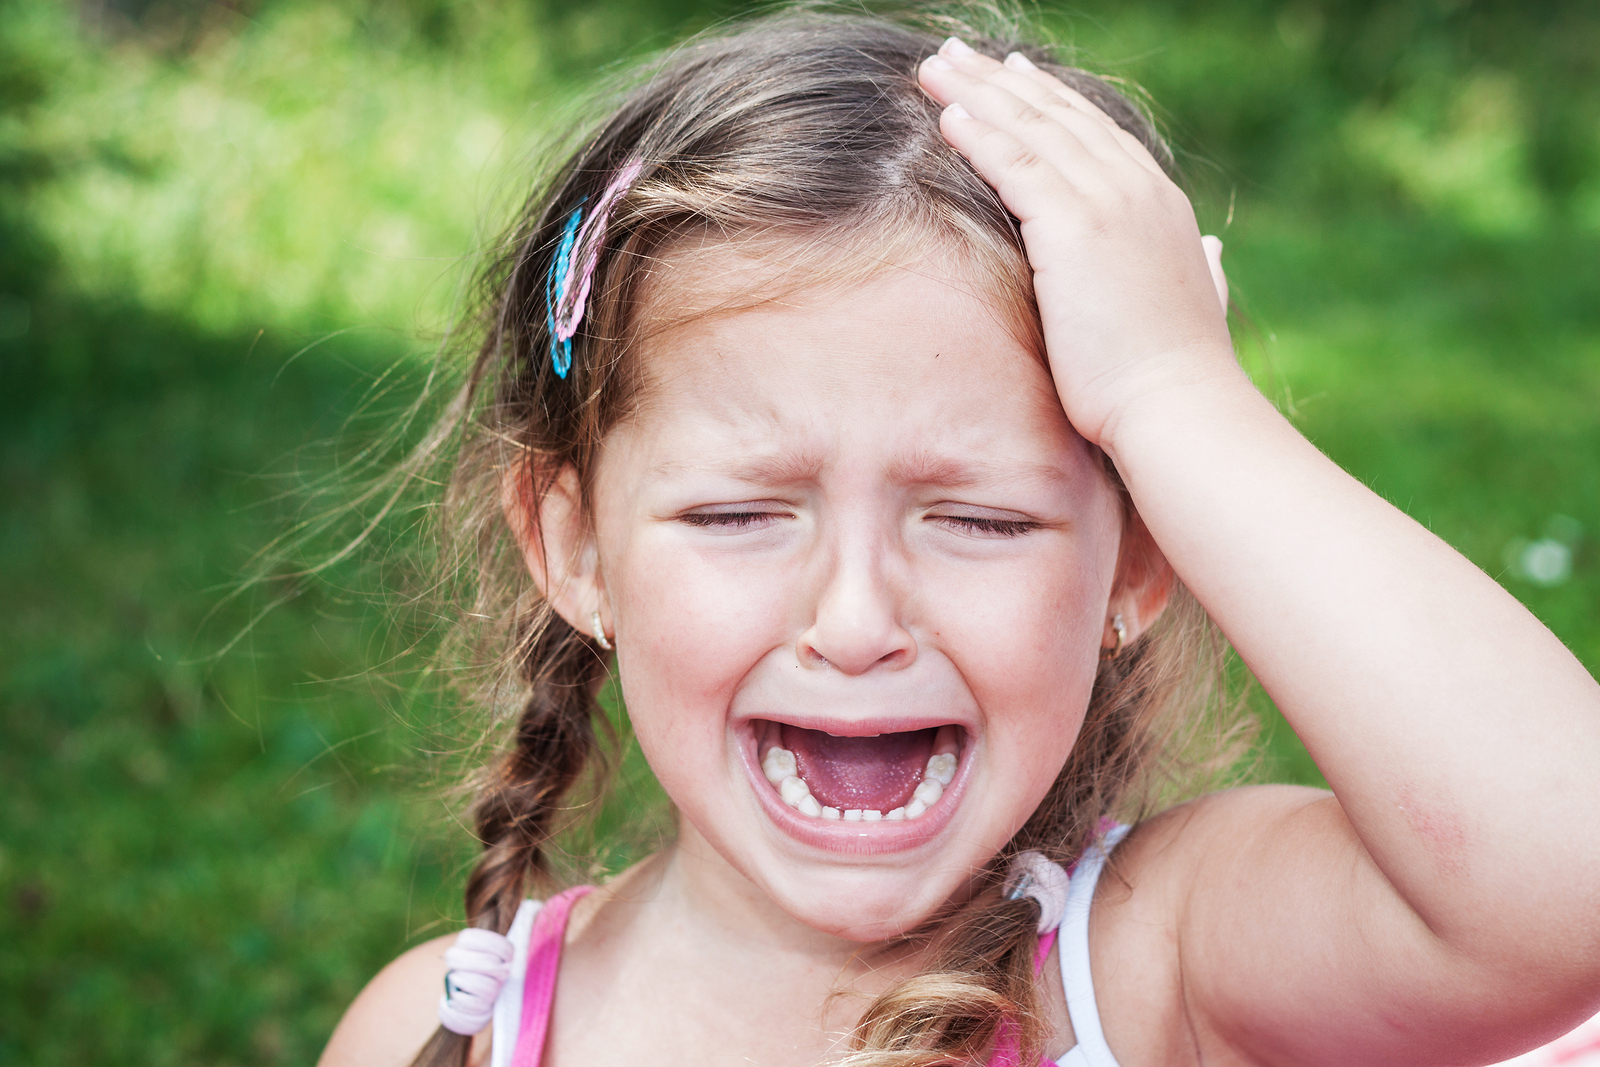 How Can Migraine In Children Be Prevented?